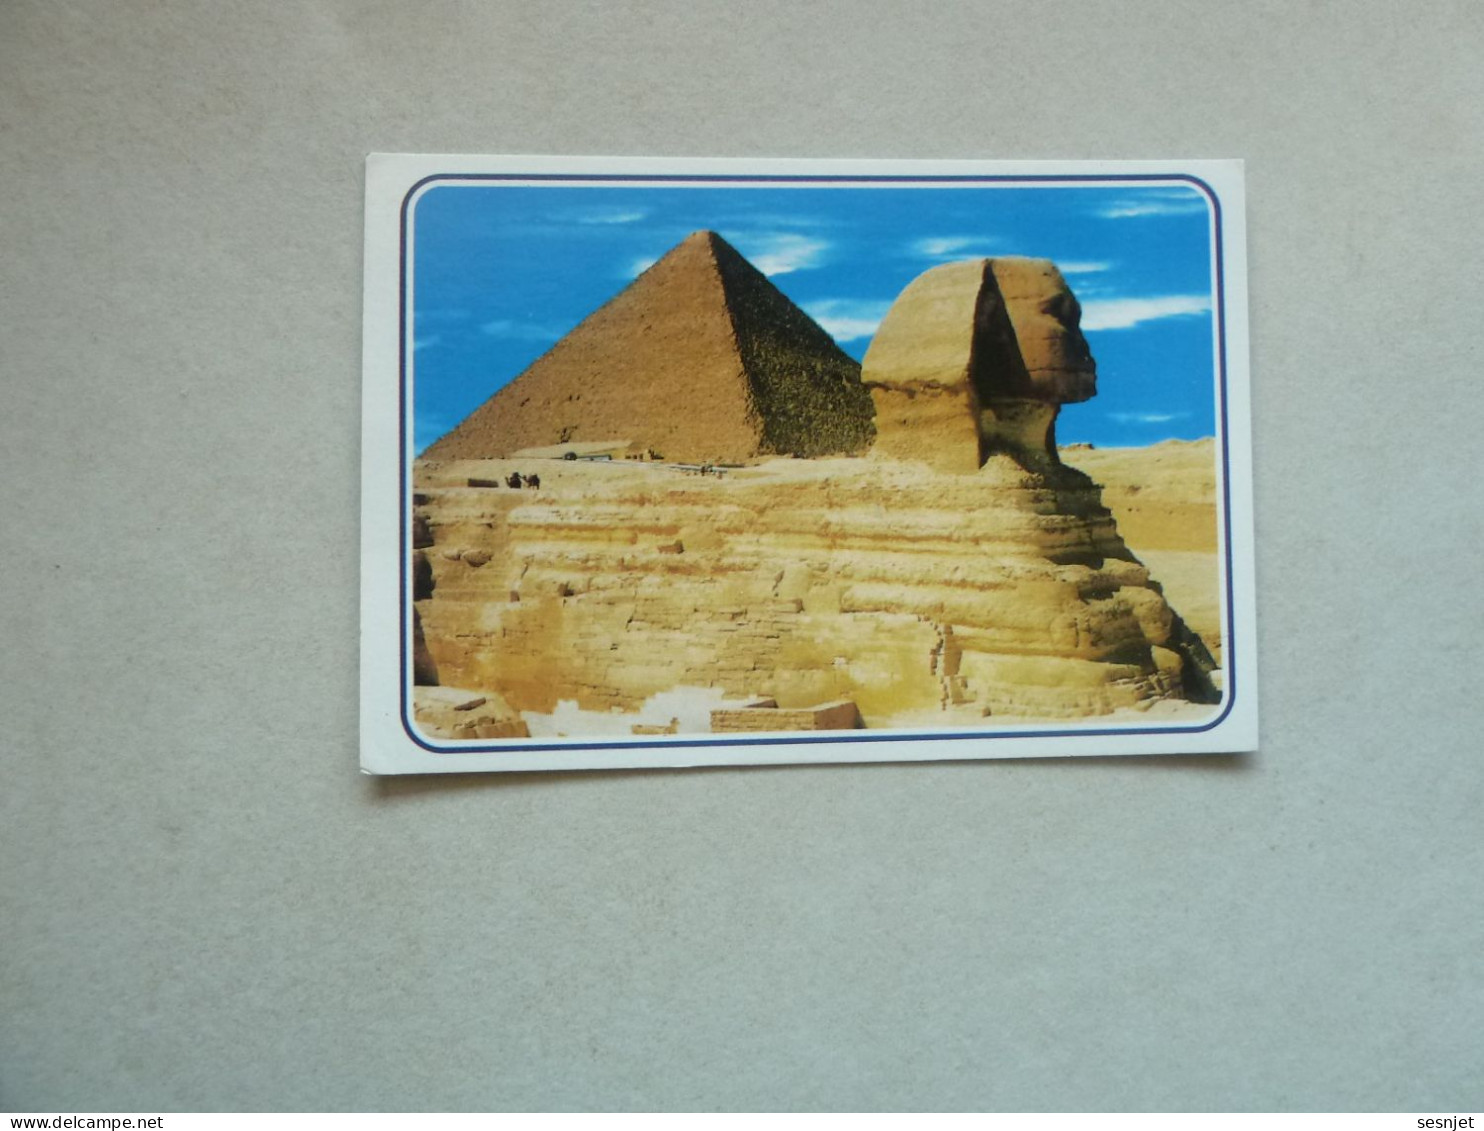 Egypte - Giza - The Great Sphinx And Keops Pyramids - 99 - Editions Al Sayad Printing - Année 2000 - - Pyramiden